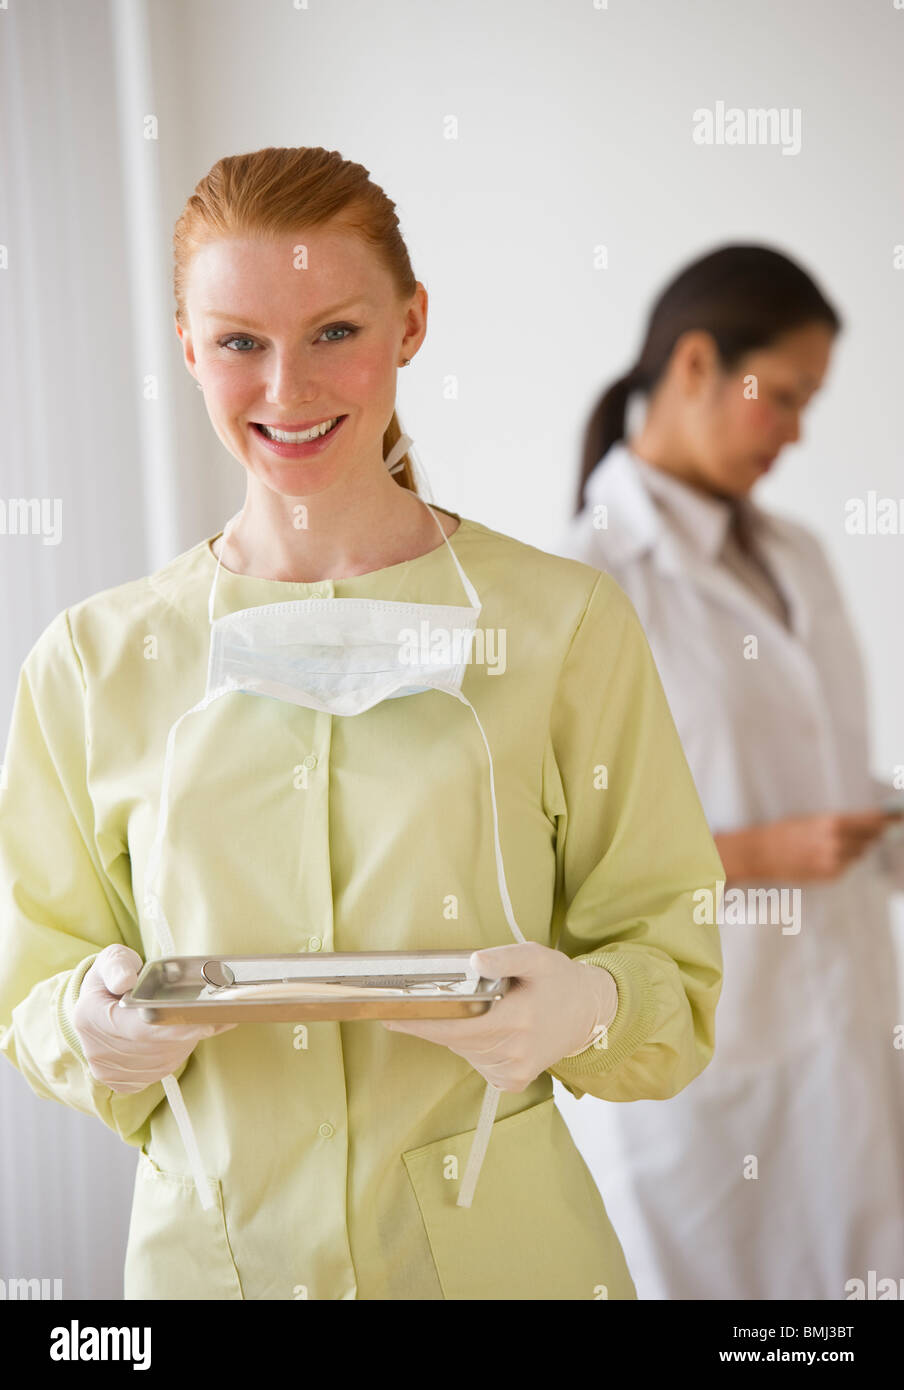 Dental assistant Stock Photo